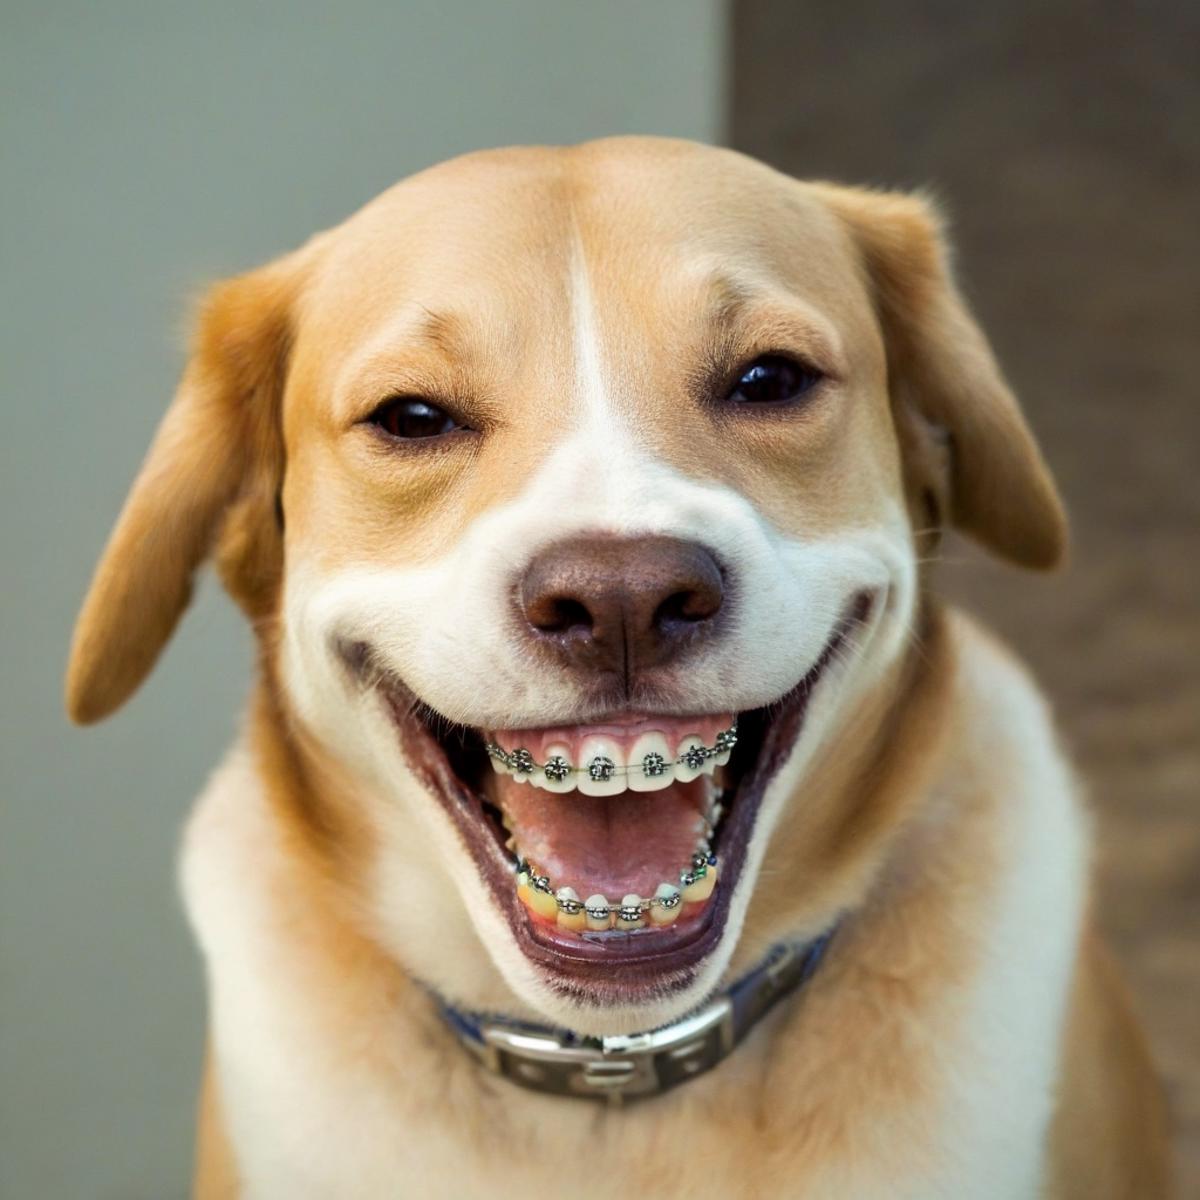 A brown and white dog wearing braces and smiling.